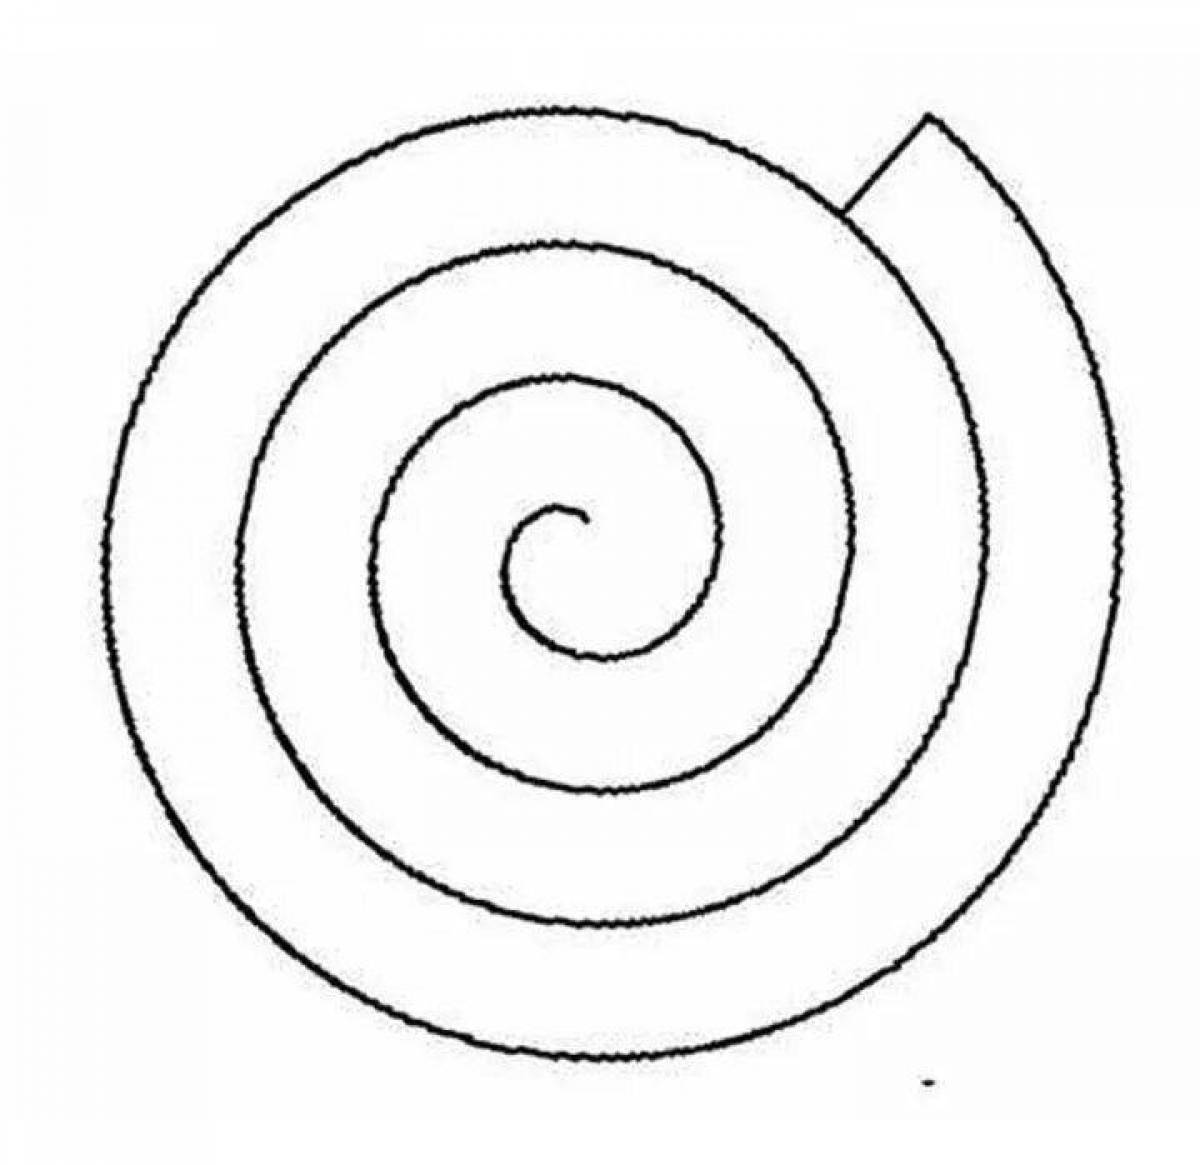 Tempting circular spiral to create a coloring page